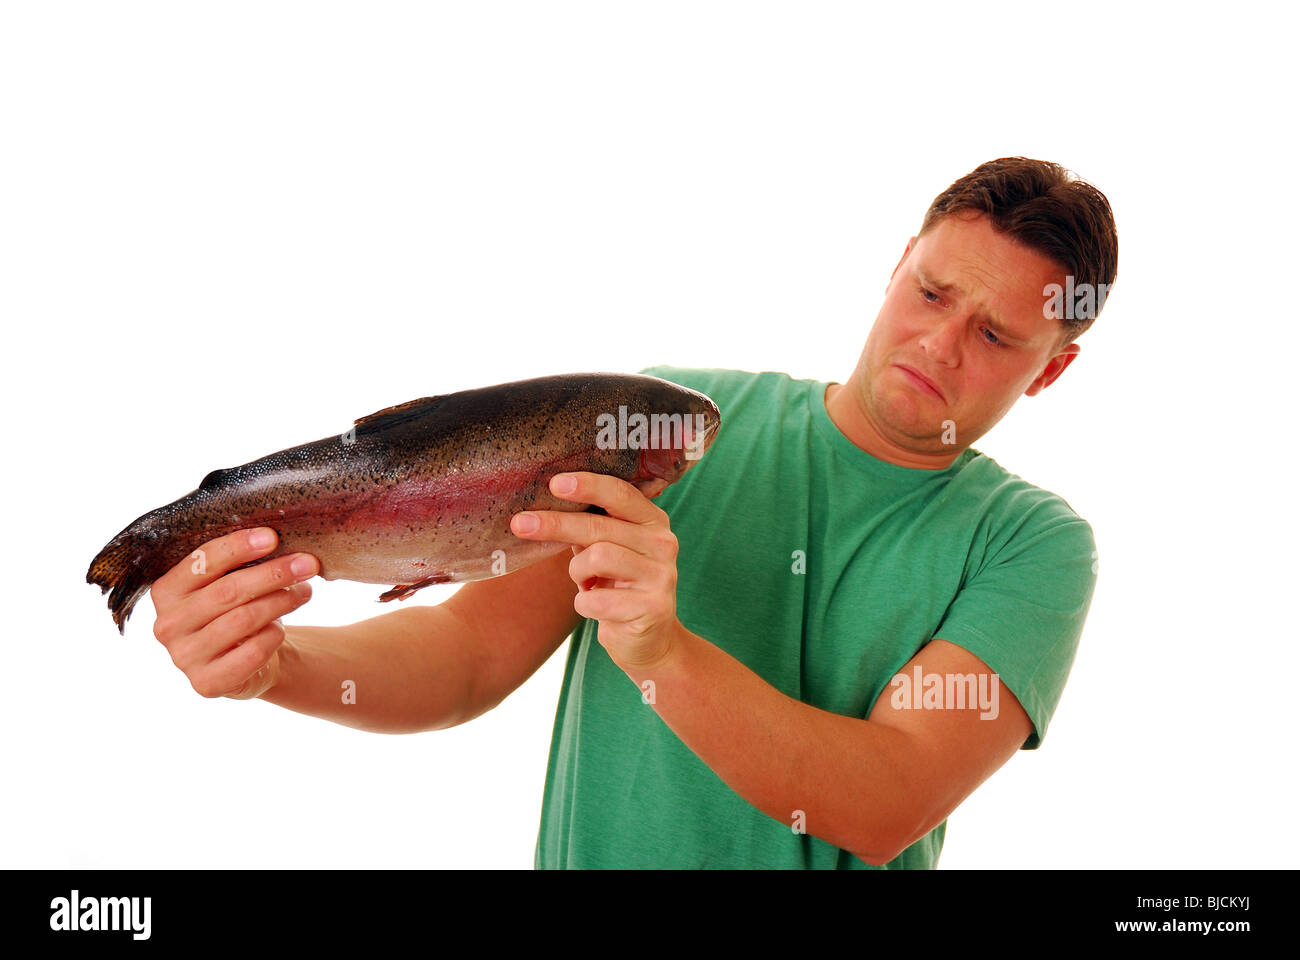 Man holding a large smelly fish Stock Photo